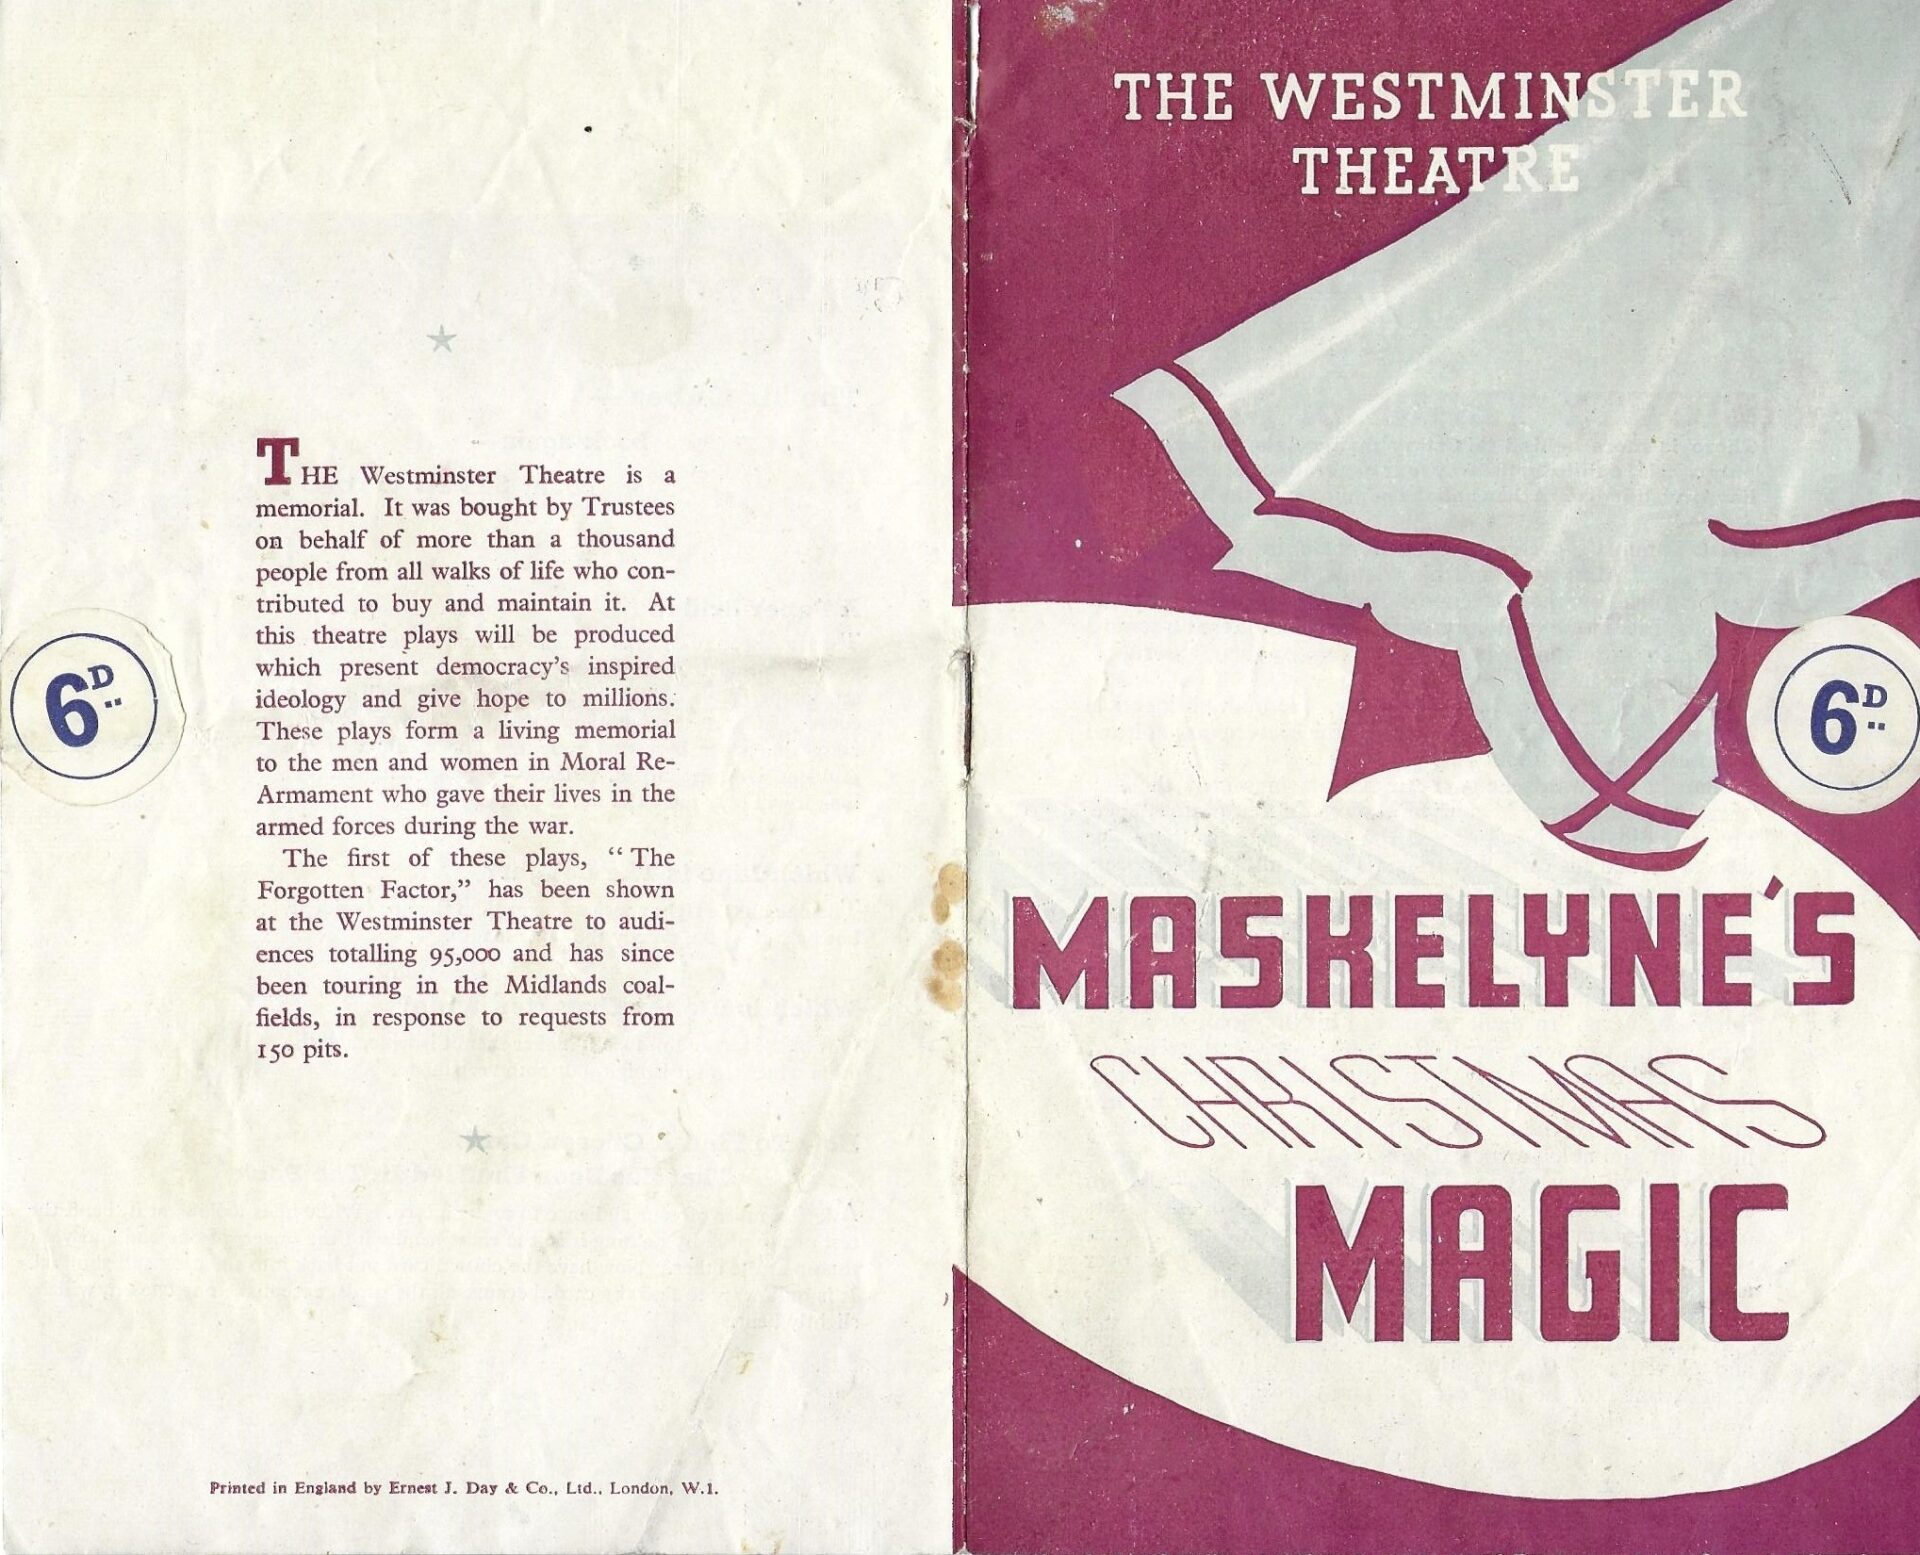 Programme for Maskelyne’s Christmas Magic at the Westminster Theatre, Christmas Season 1947